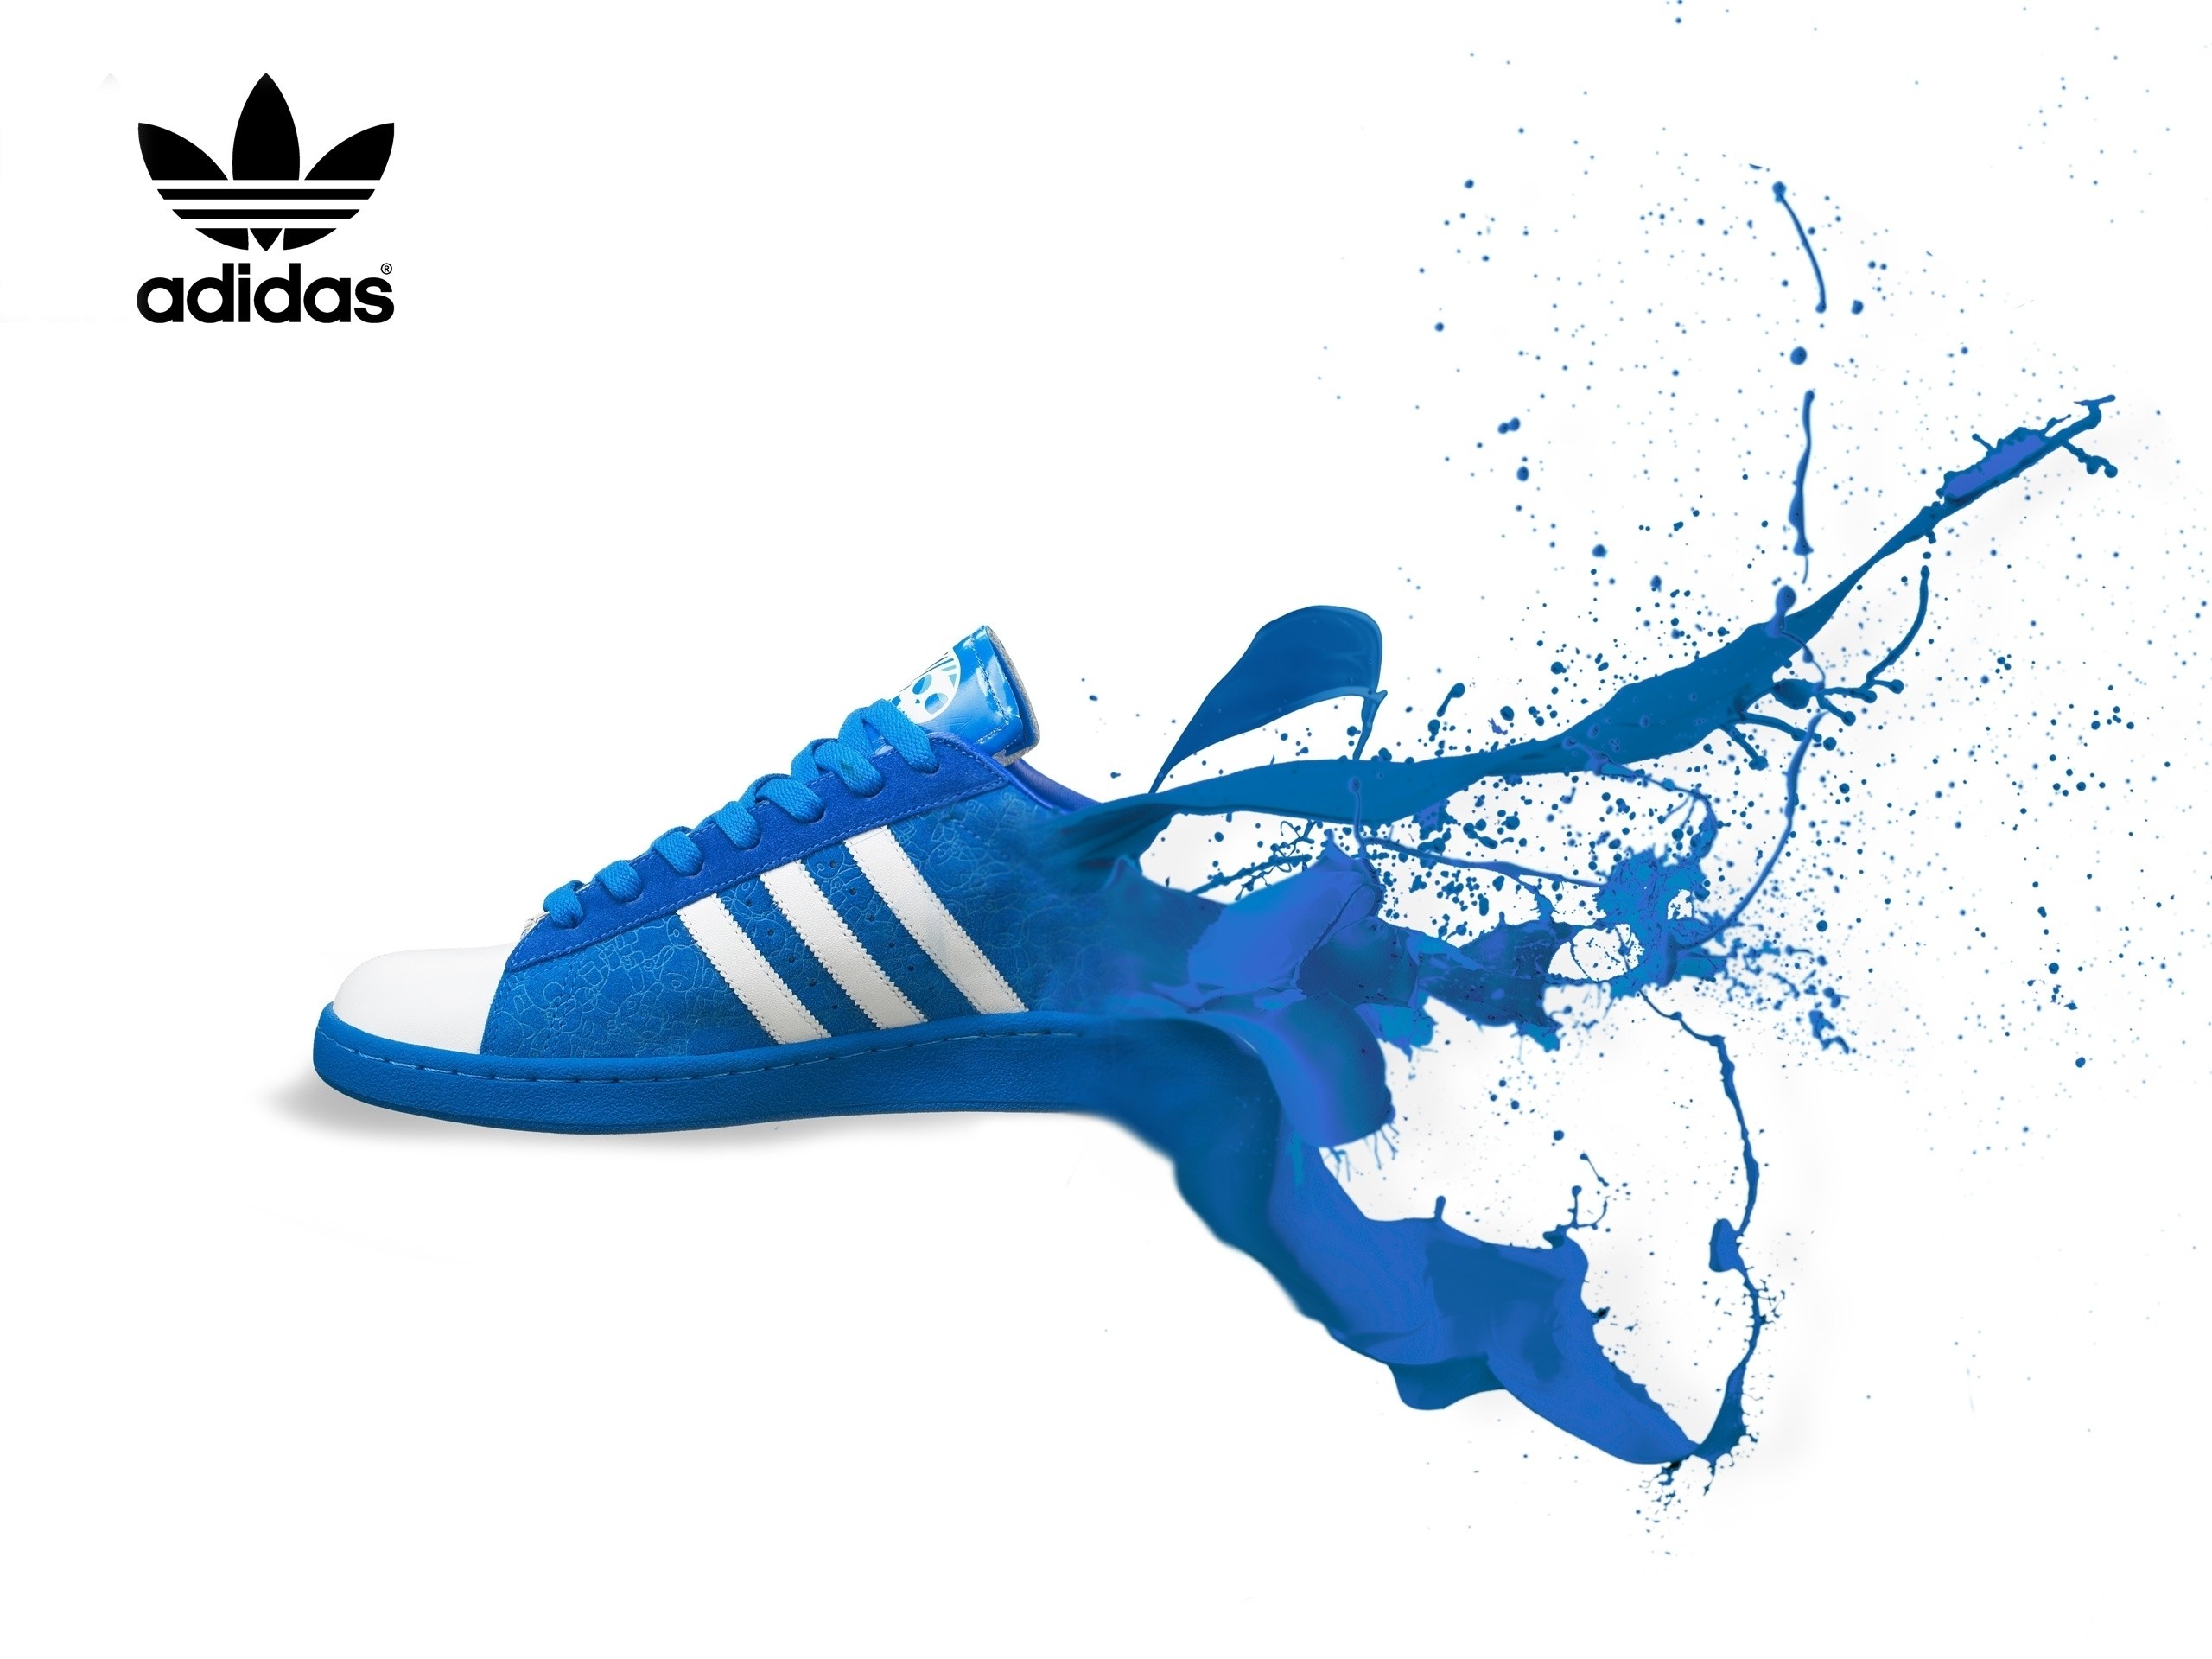 paint, Adidas, Shoes, Sneakers, White, Background Wallpaper